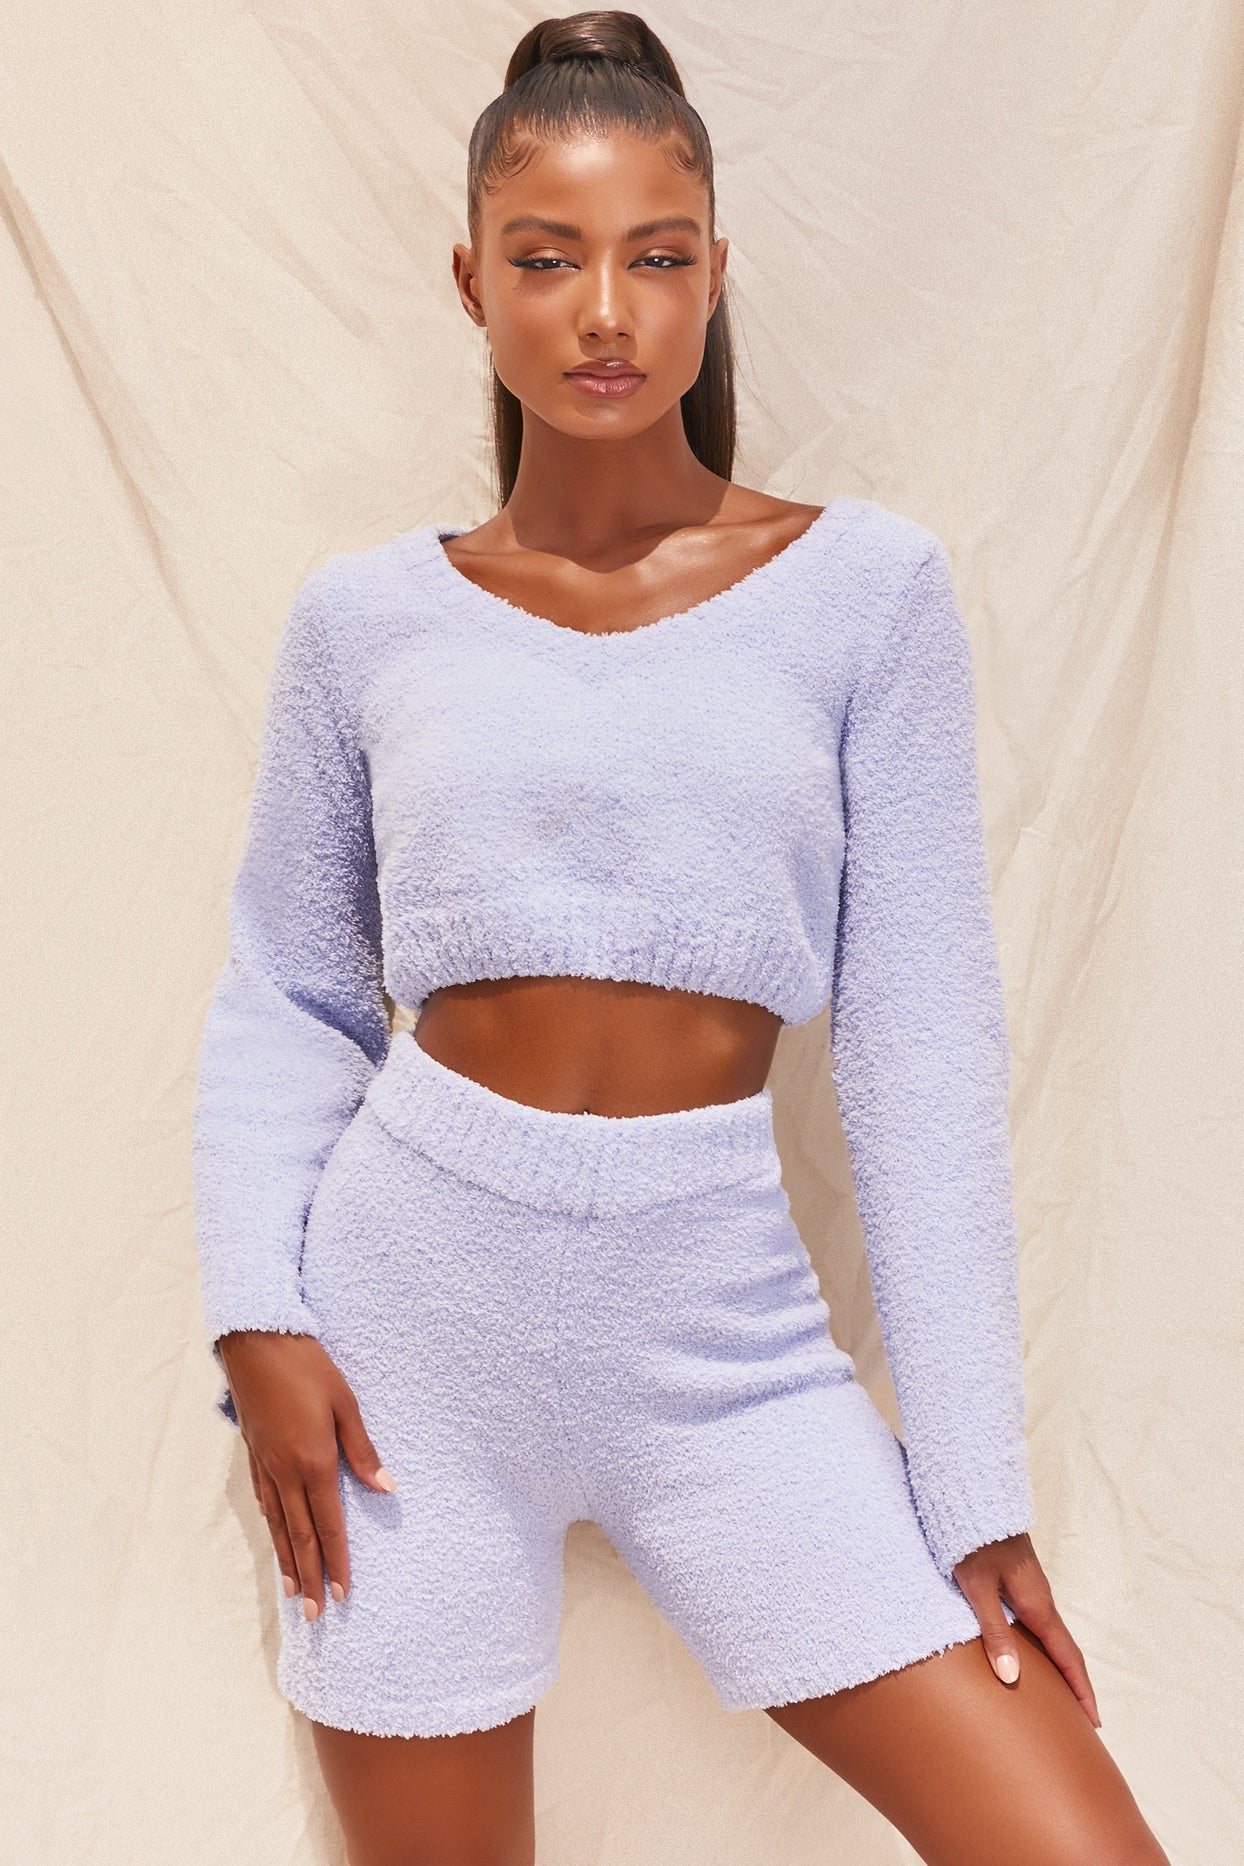 Easy Does It Cosy Lounge Shorts in Baby Blue